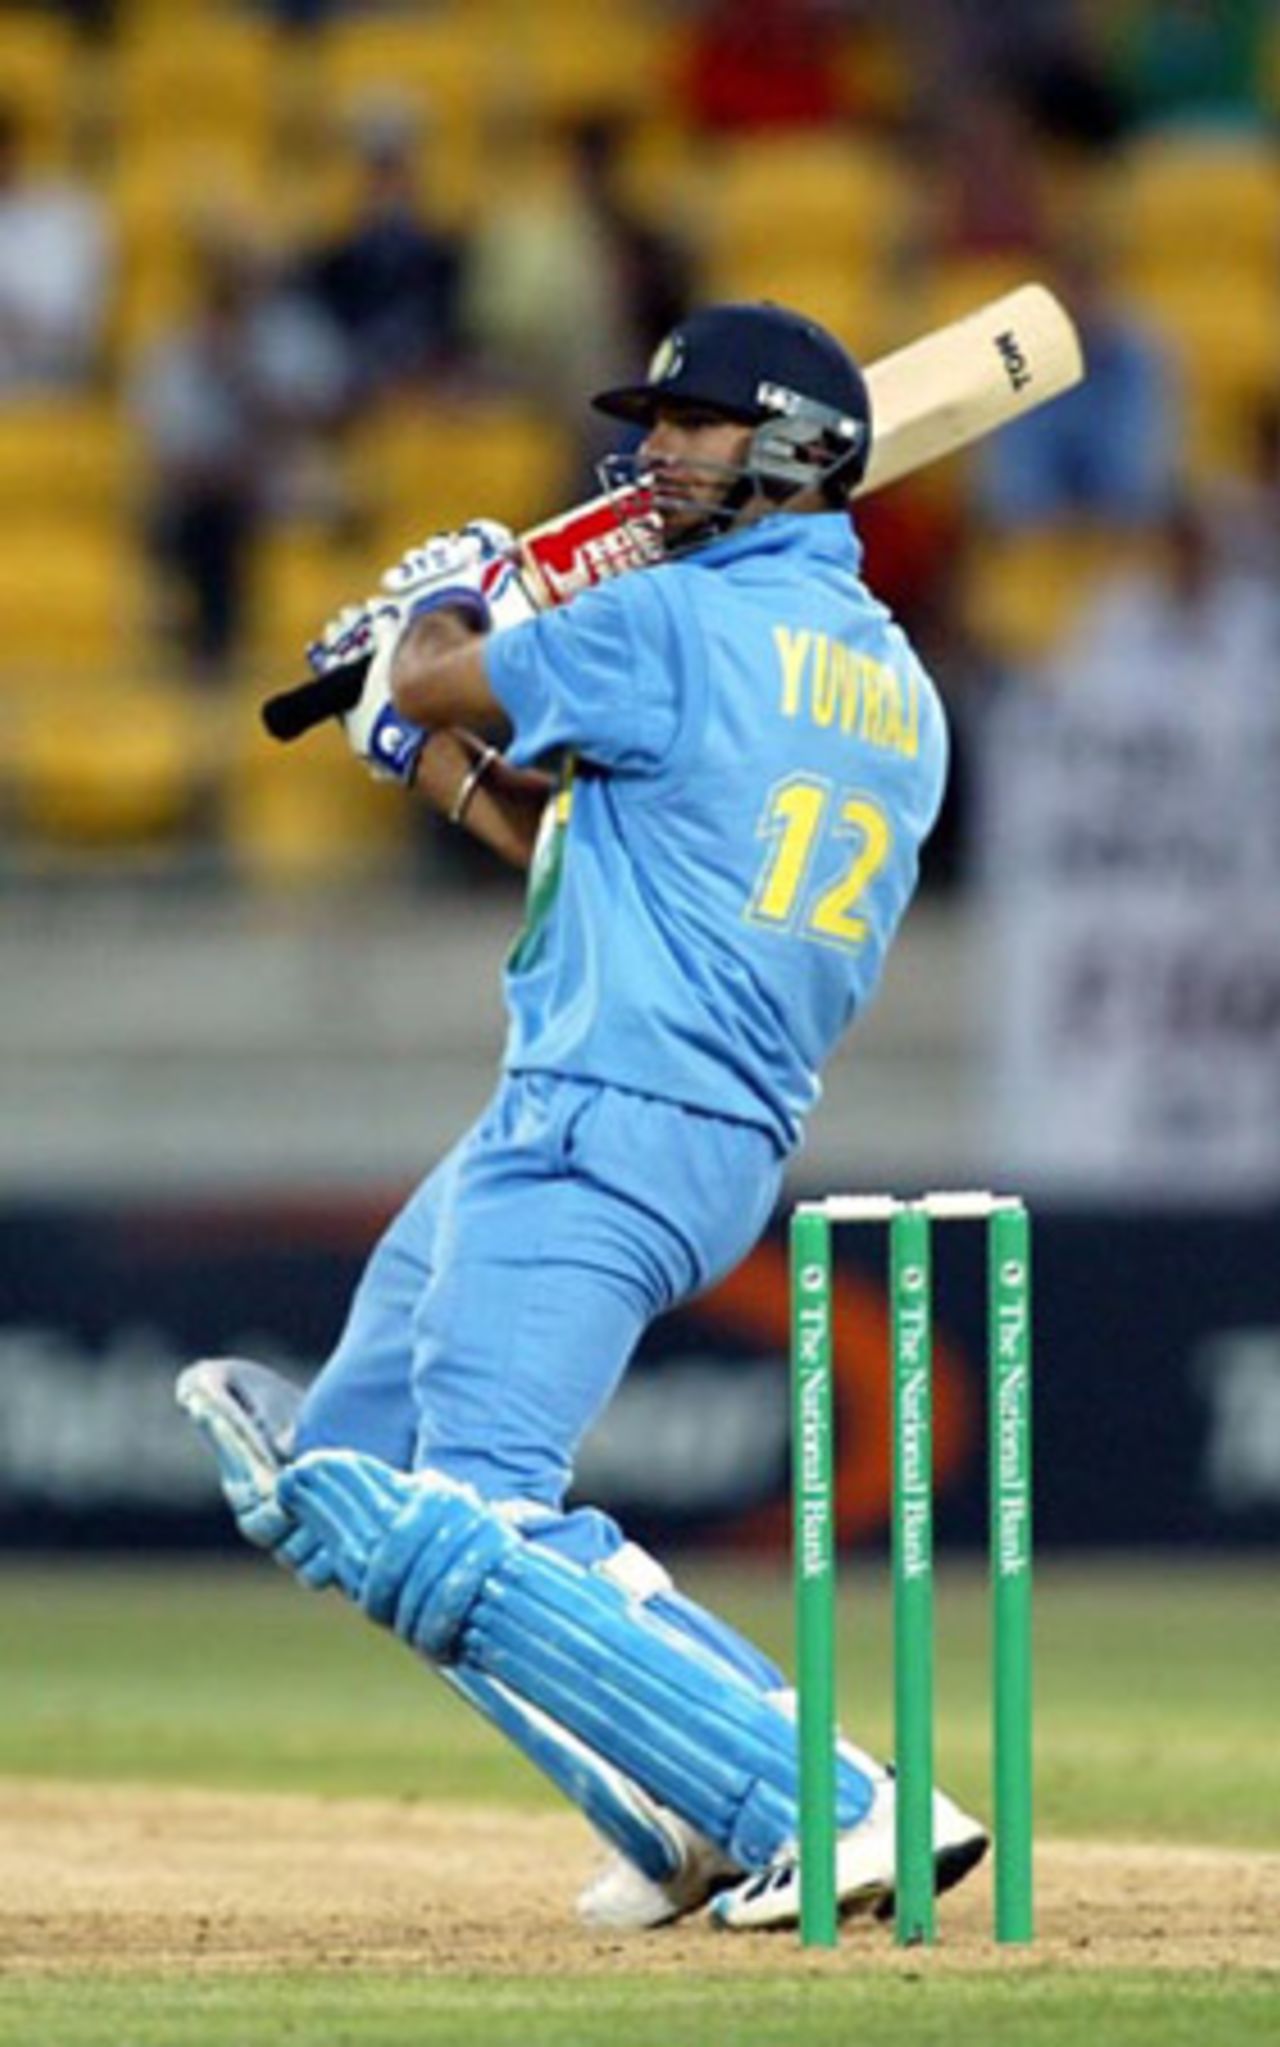 Indian batsman Yuvraj Singh cuts a delivery through point during his innings of 54. 5th ODI: New Zealand v India at Westpac Stadium, Wellington, 8 January 2003.